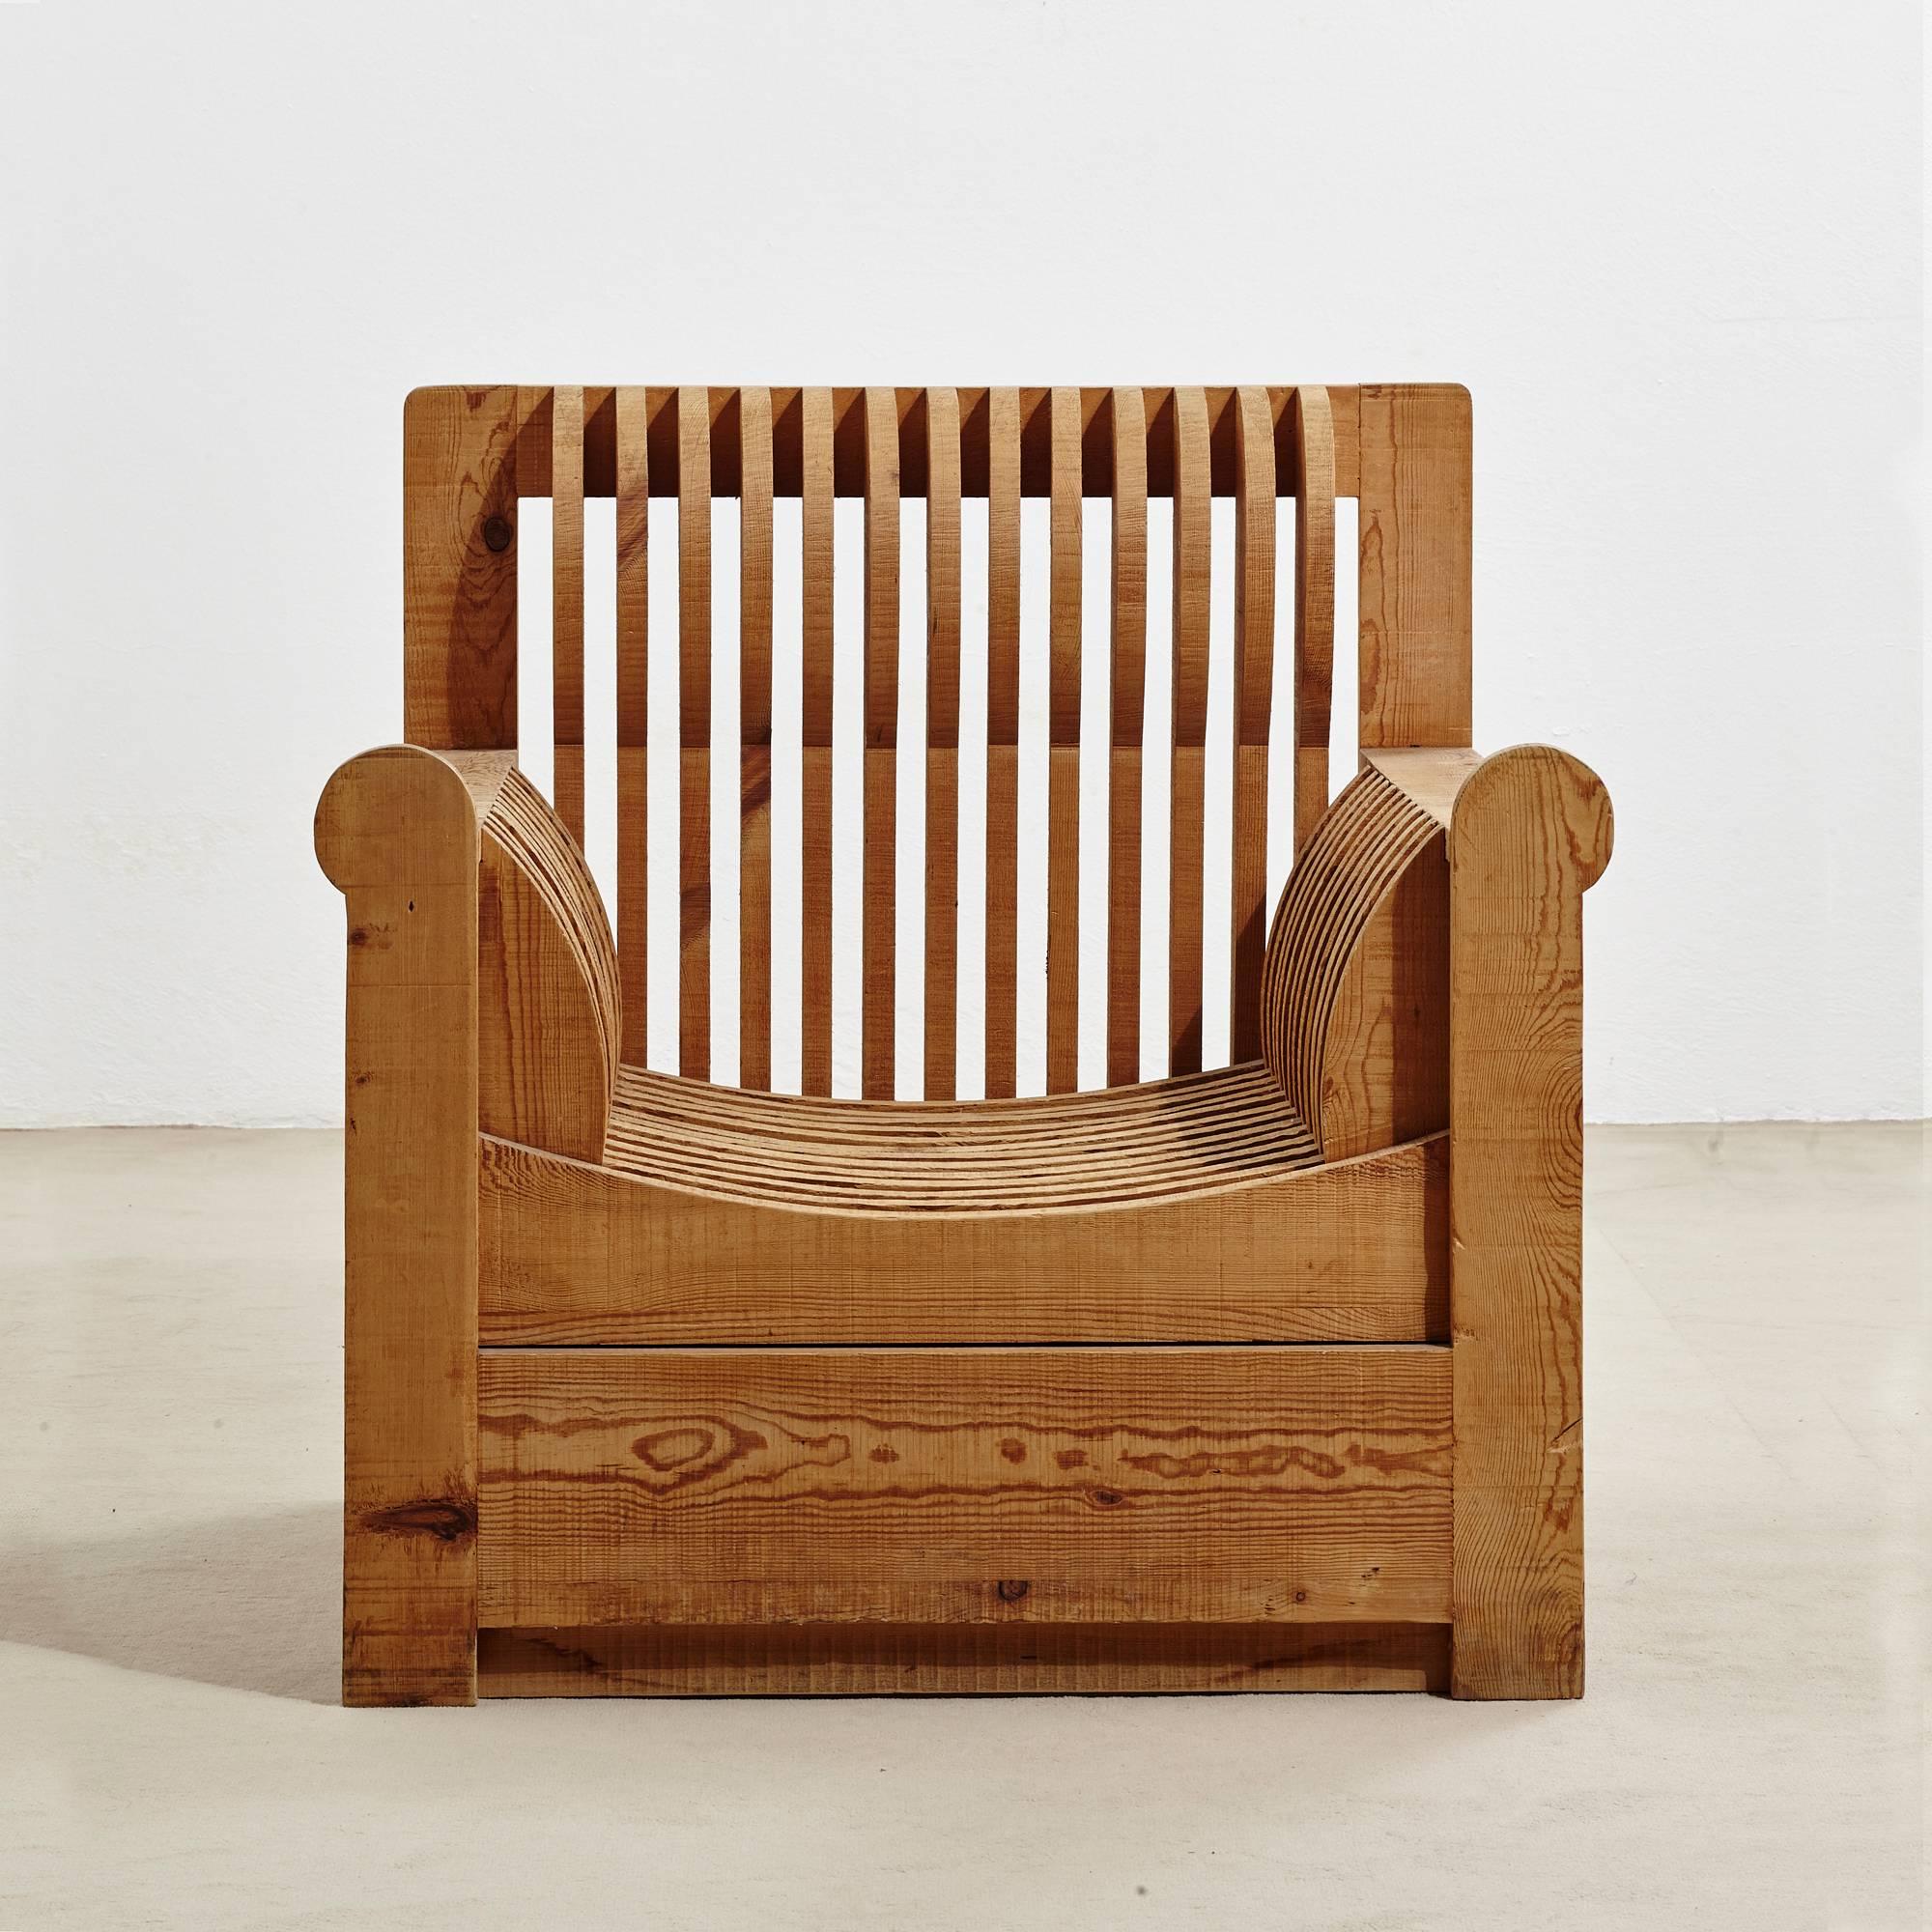 This armchair in Russian pine was designed in 1972 as part of the 